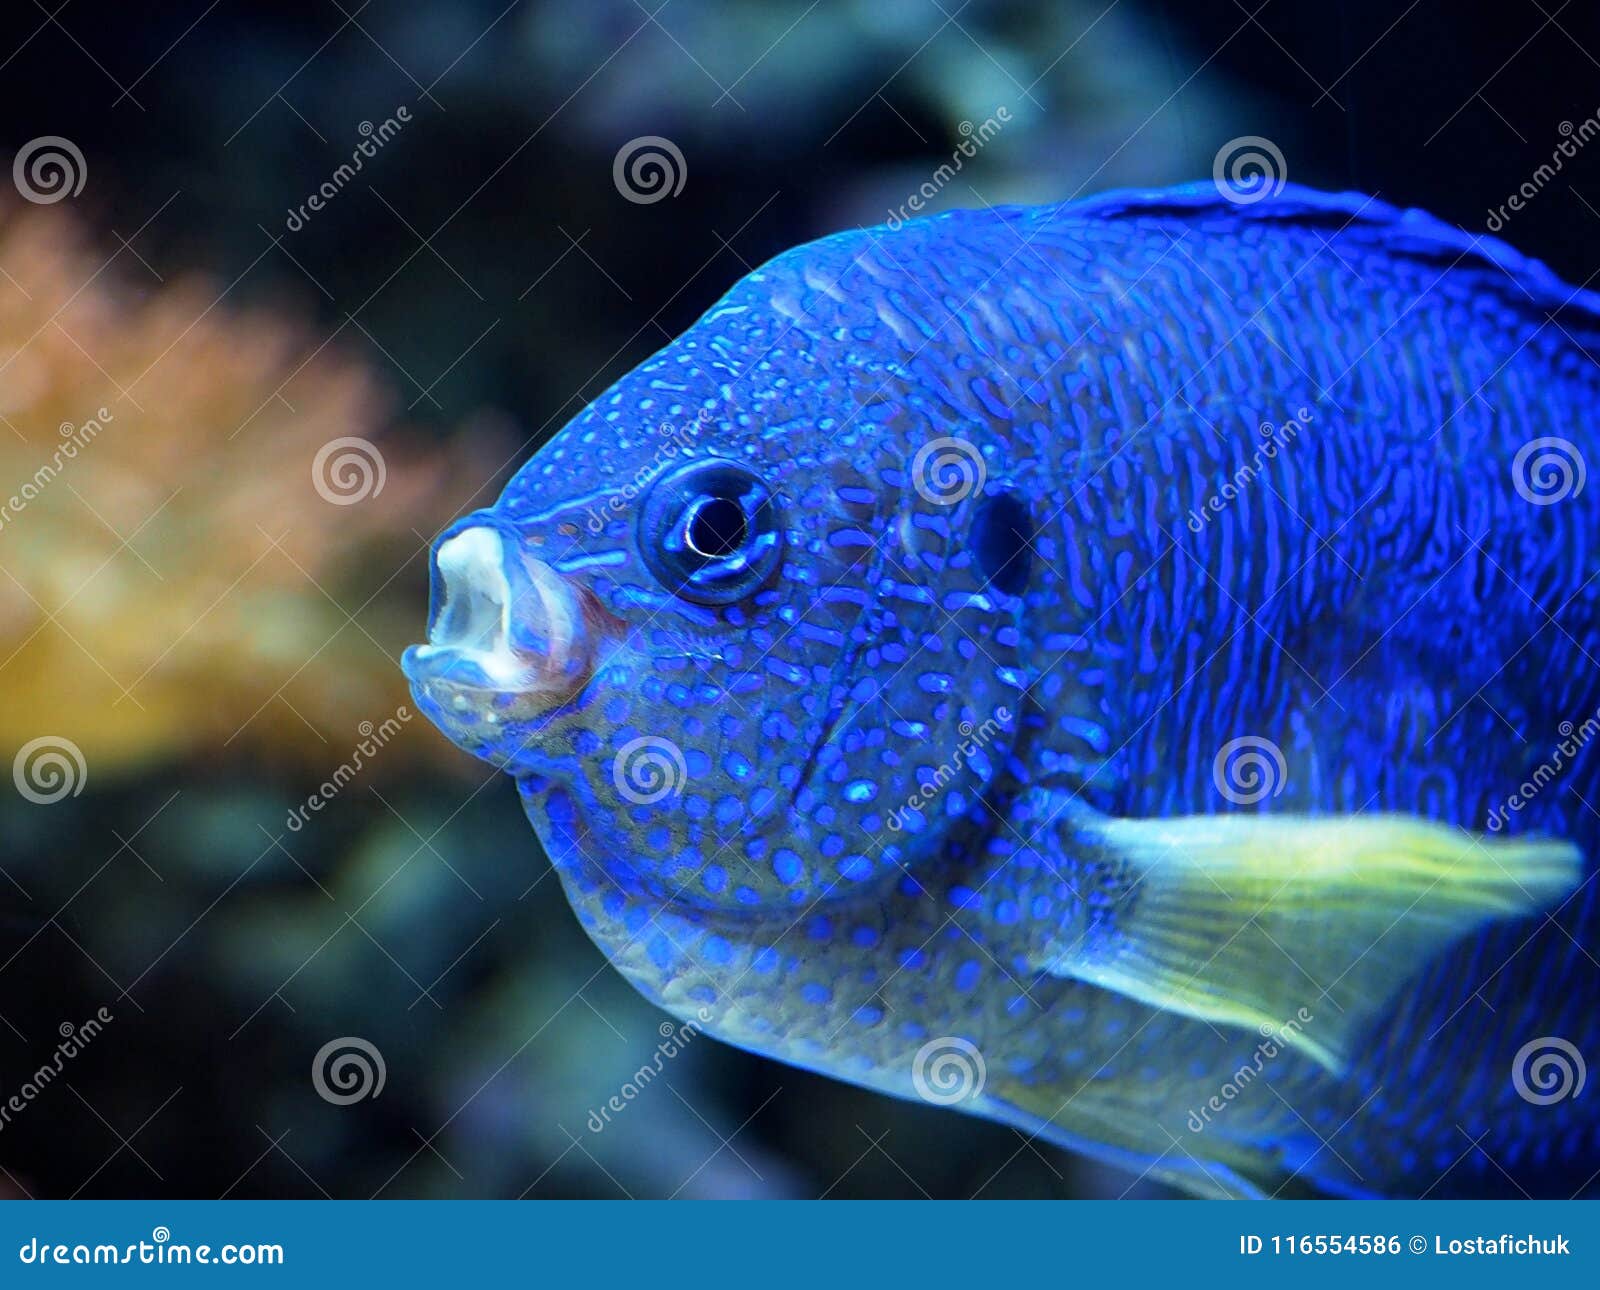 small blue freshwater fish